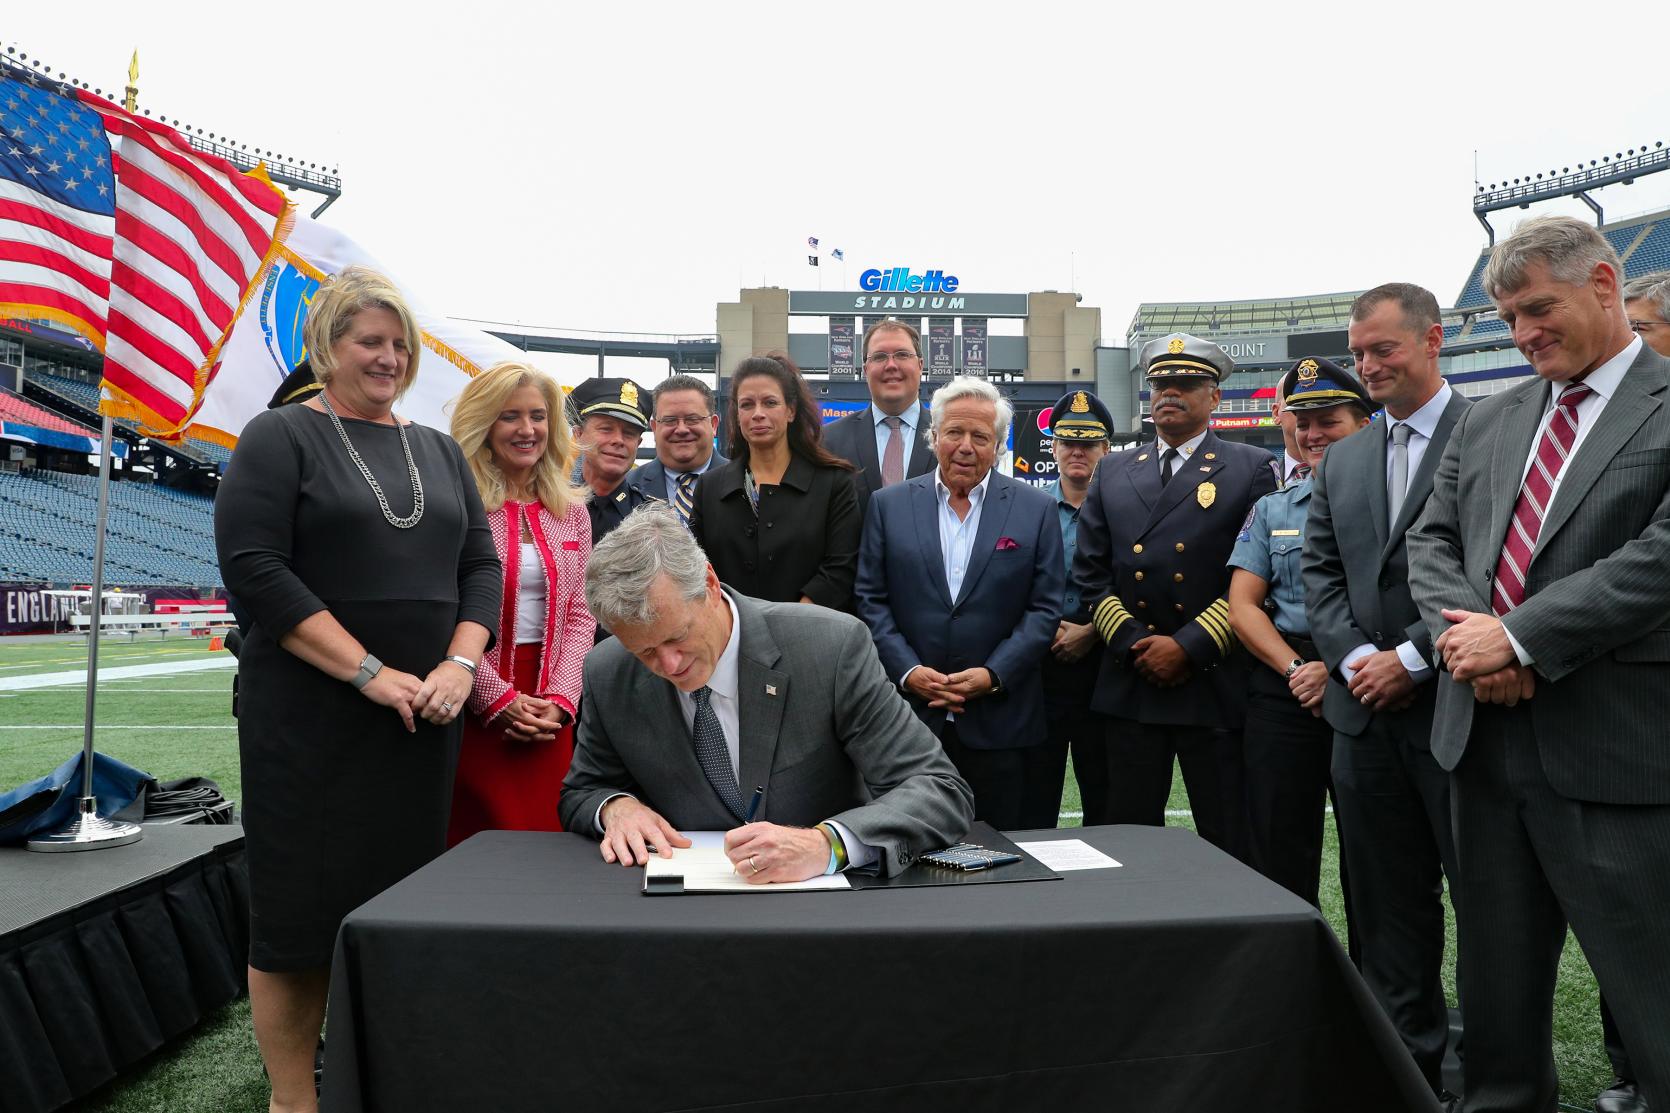 Governor Baker signs executive order to assemble a task force of security experts who will analyze ways to augment safety and preparedness at large venues.